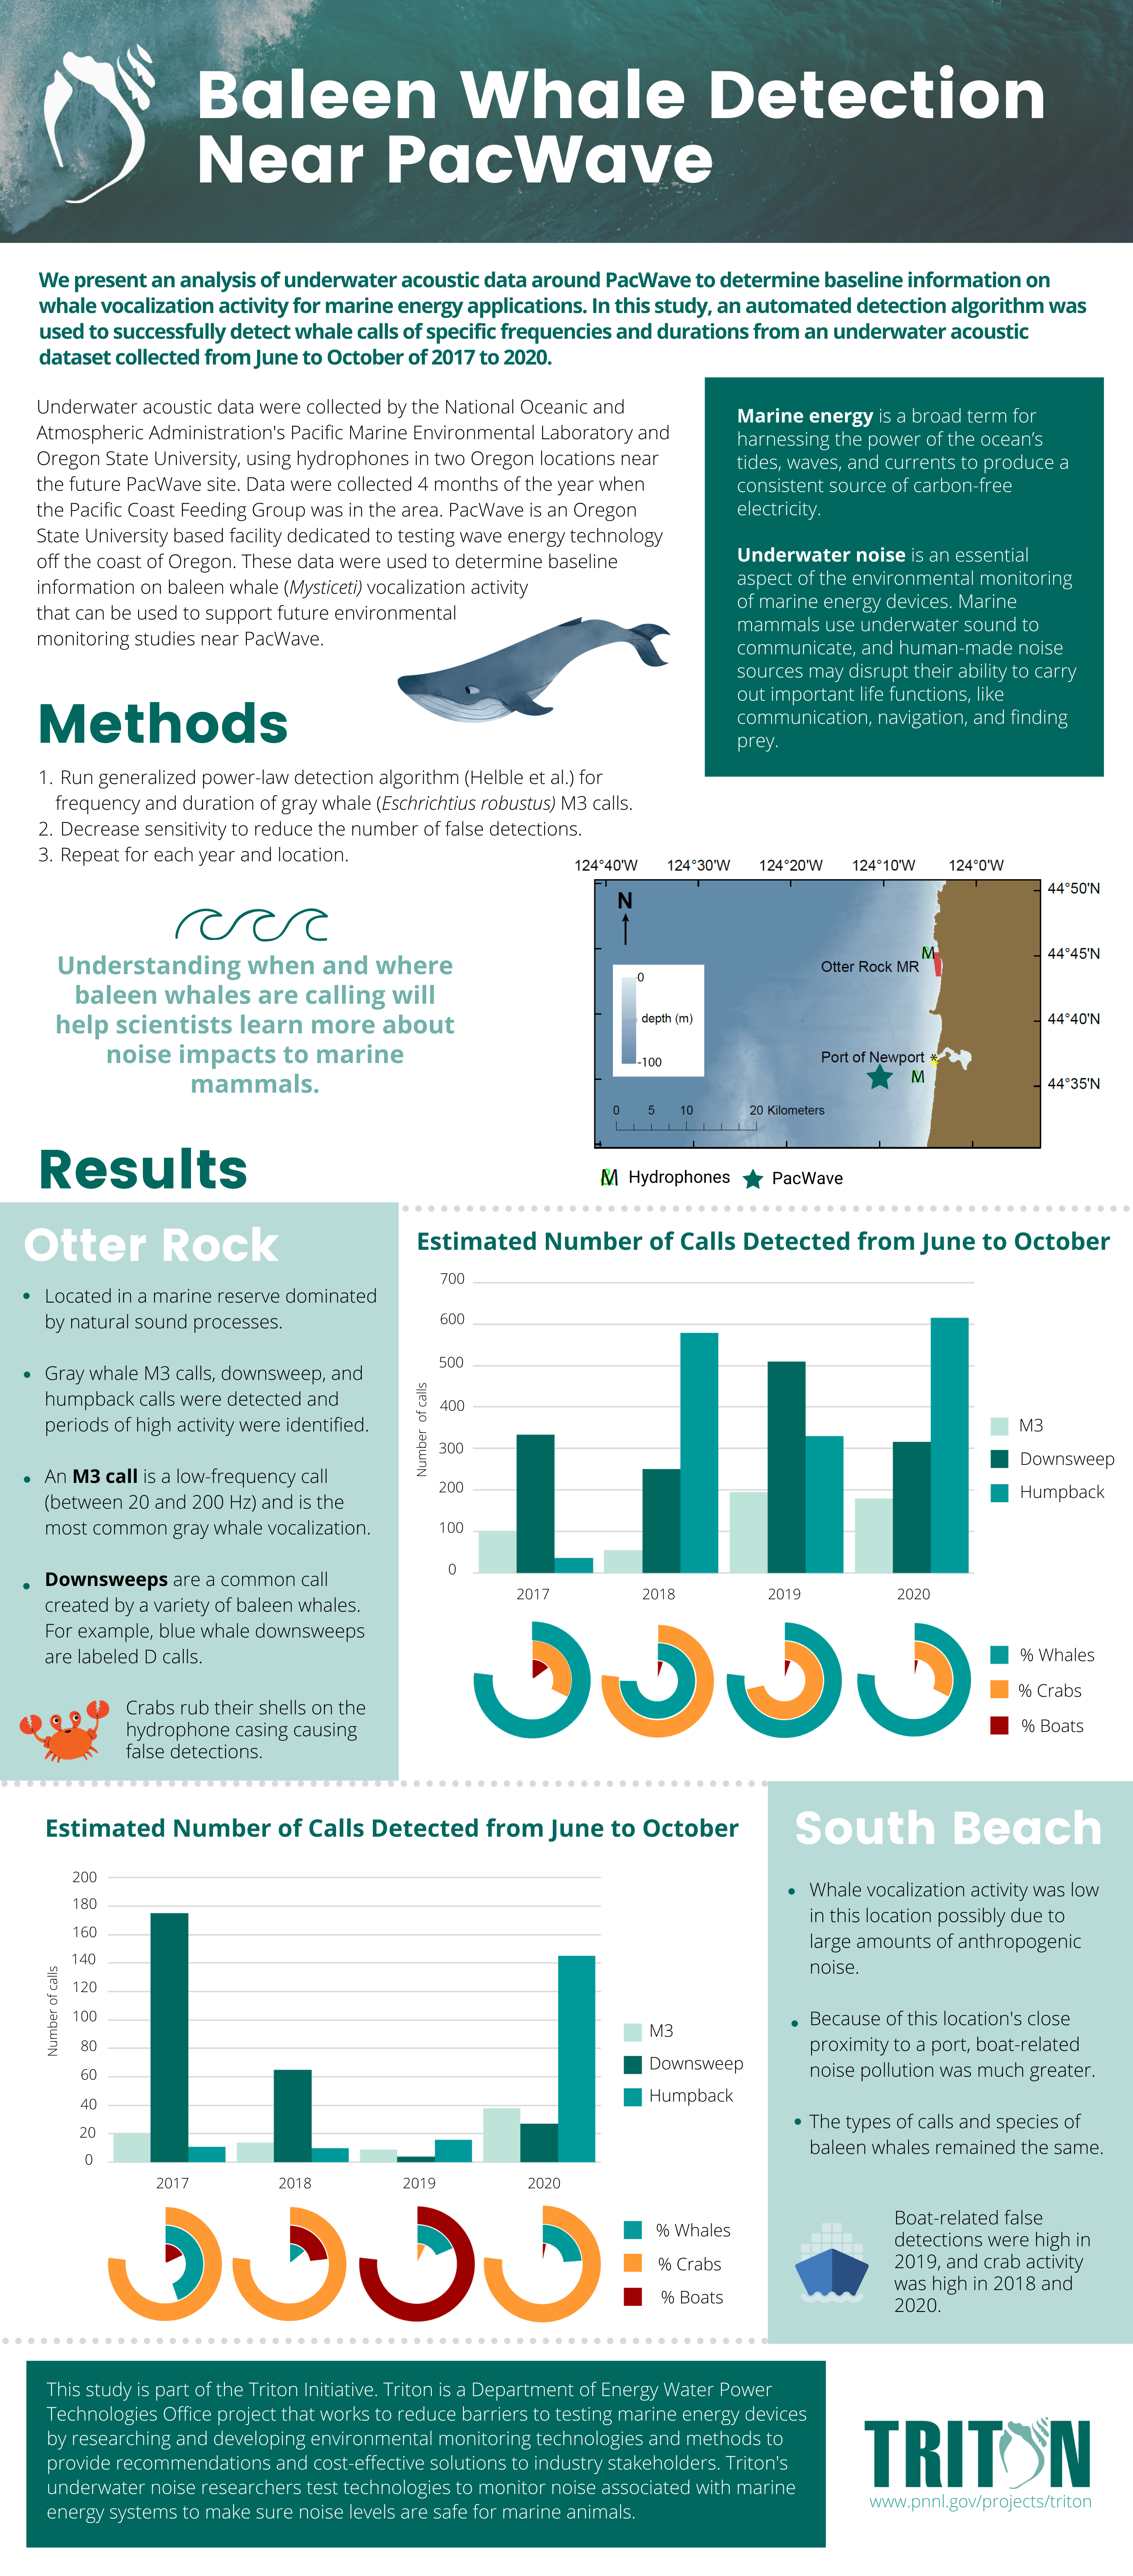 Infographic on a whale vocalization study describing vocalization of humpback whales at two locations off the coast of Oregon. Results show types of vocalization and other noises at each site.   